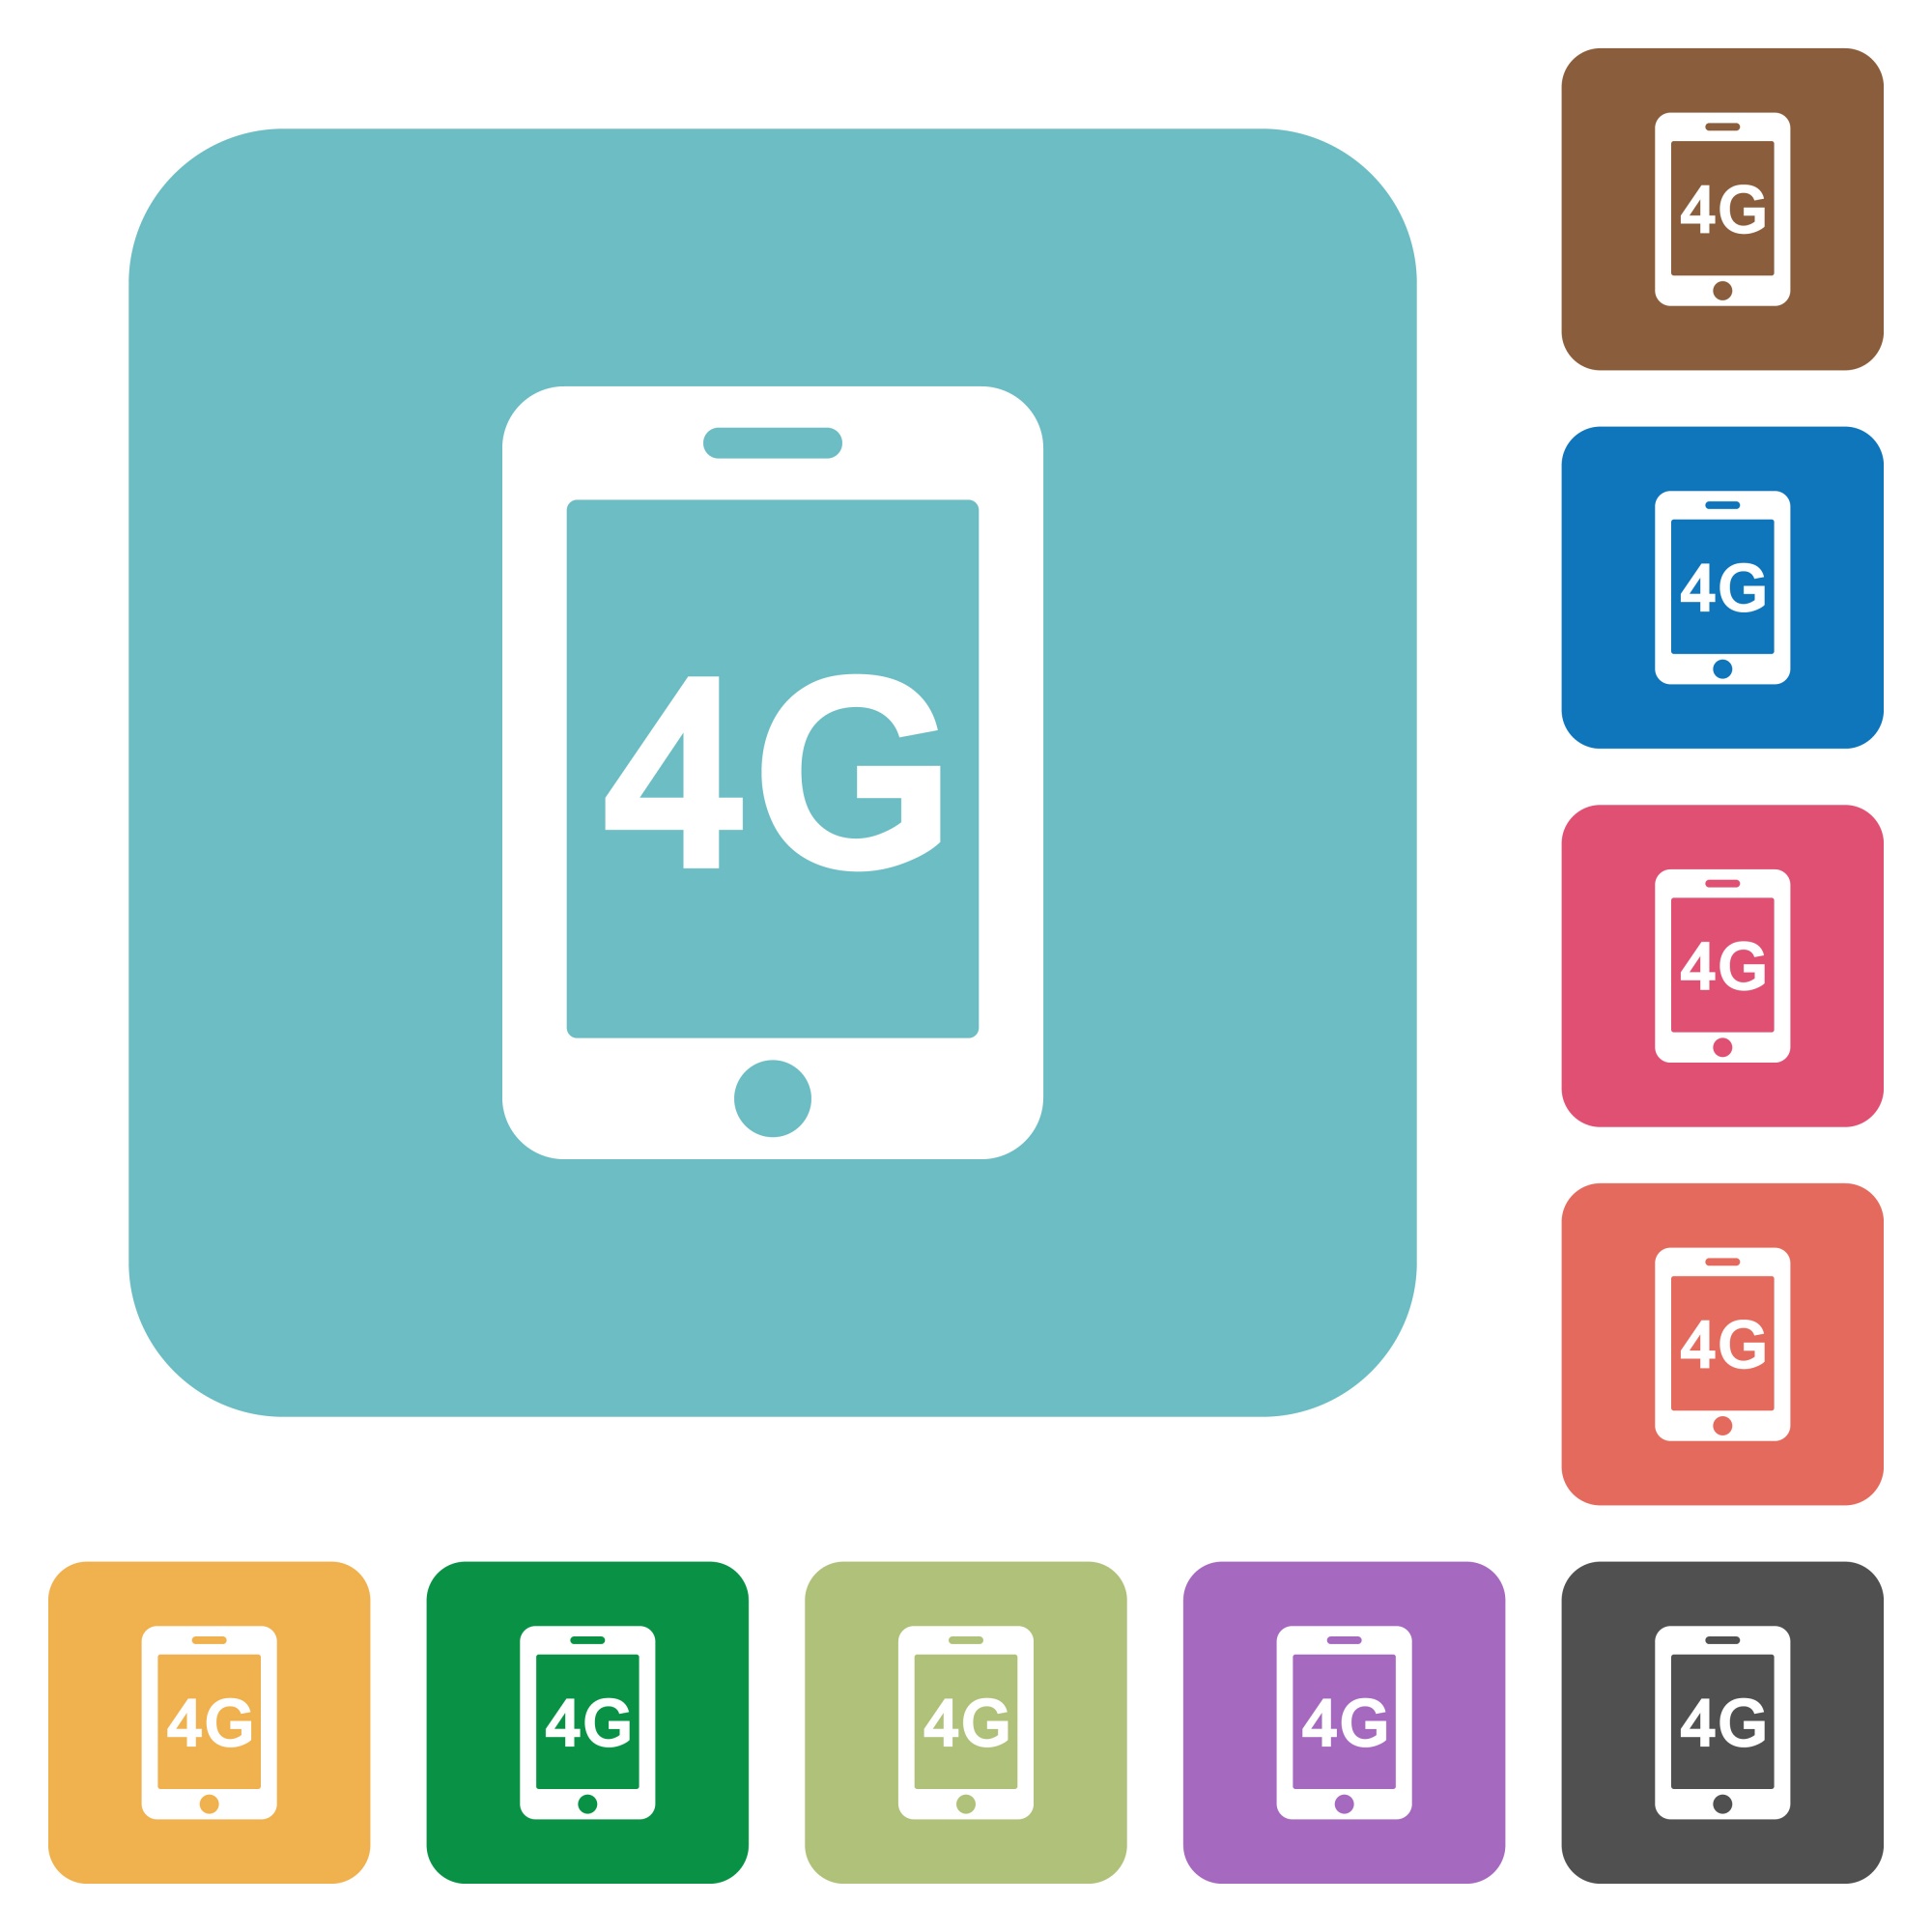 Fourth gereration mobile network white flat icons on color rounded square backgrounds - Free image